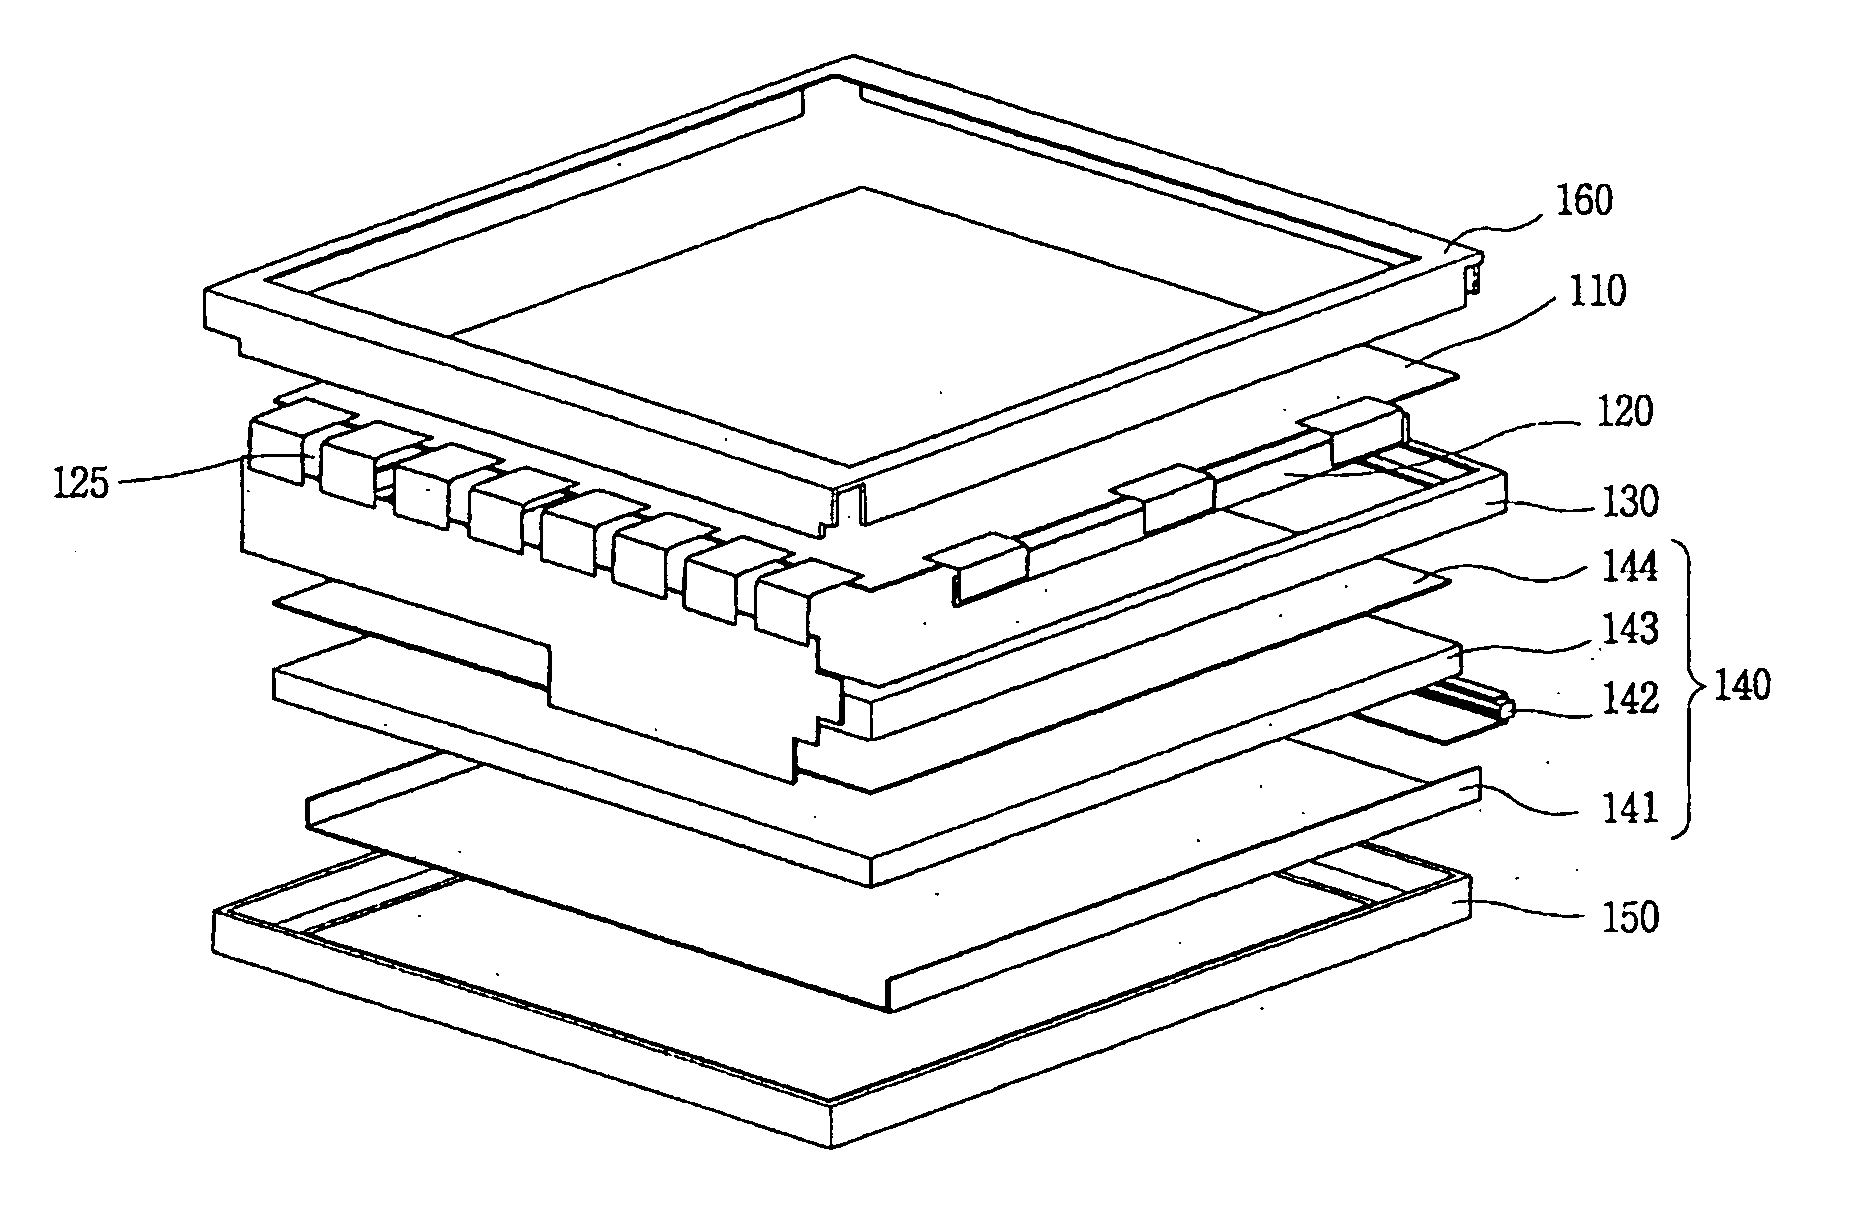 Liquid crystal display device and method of assembling the same